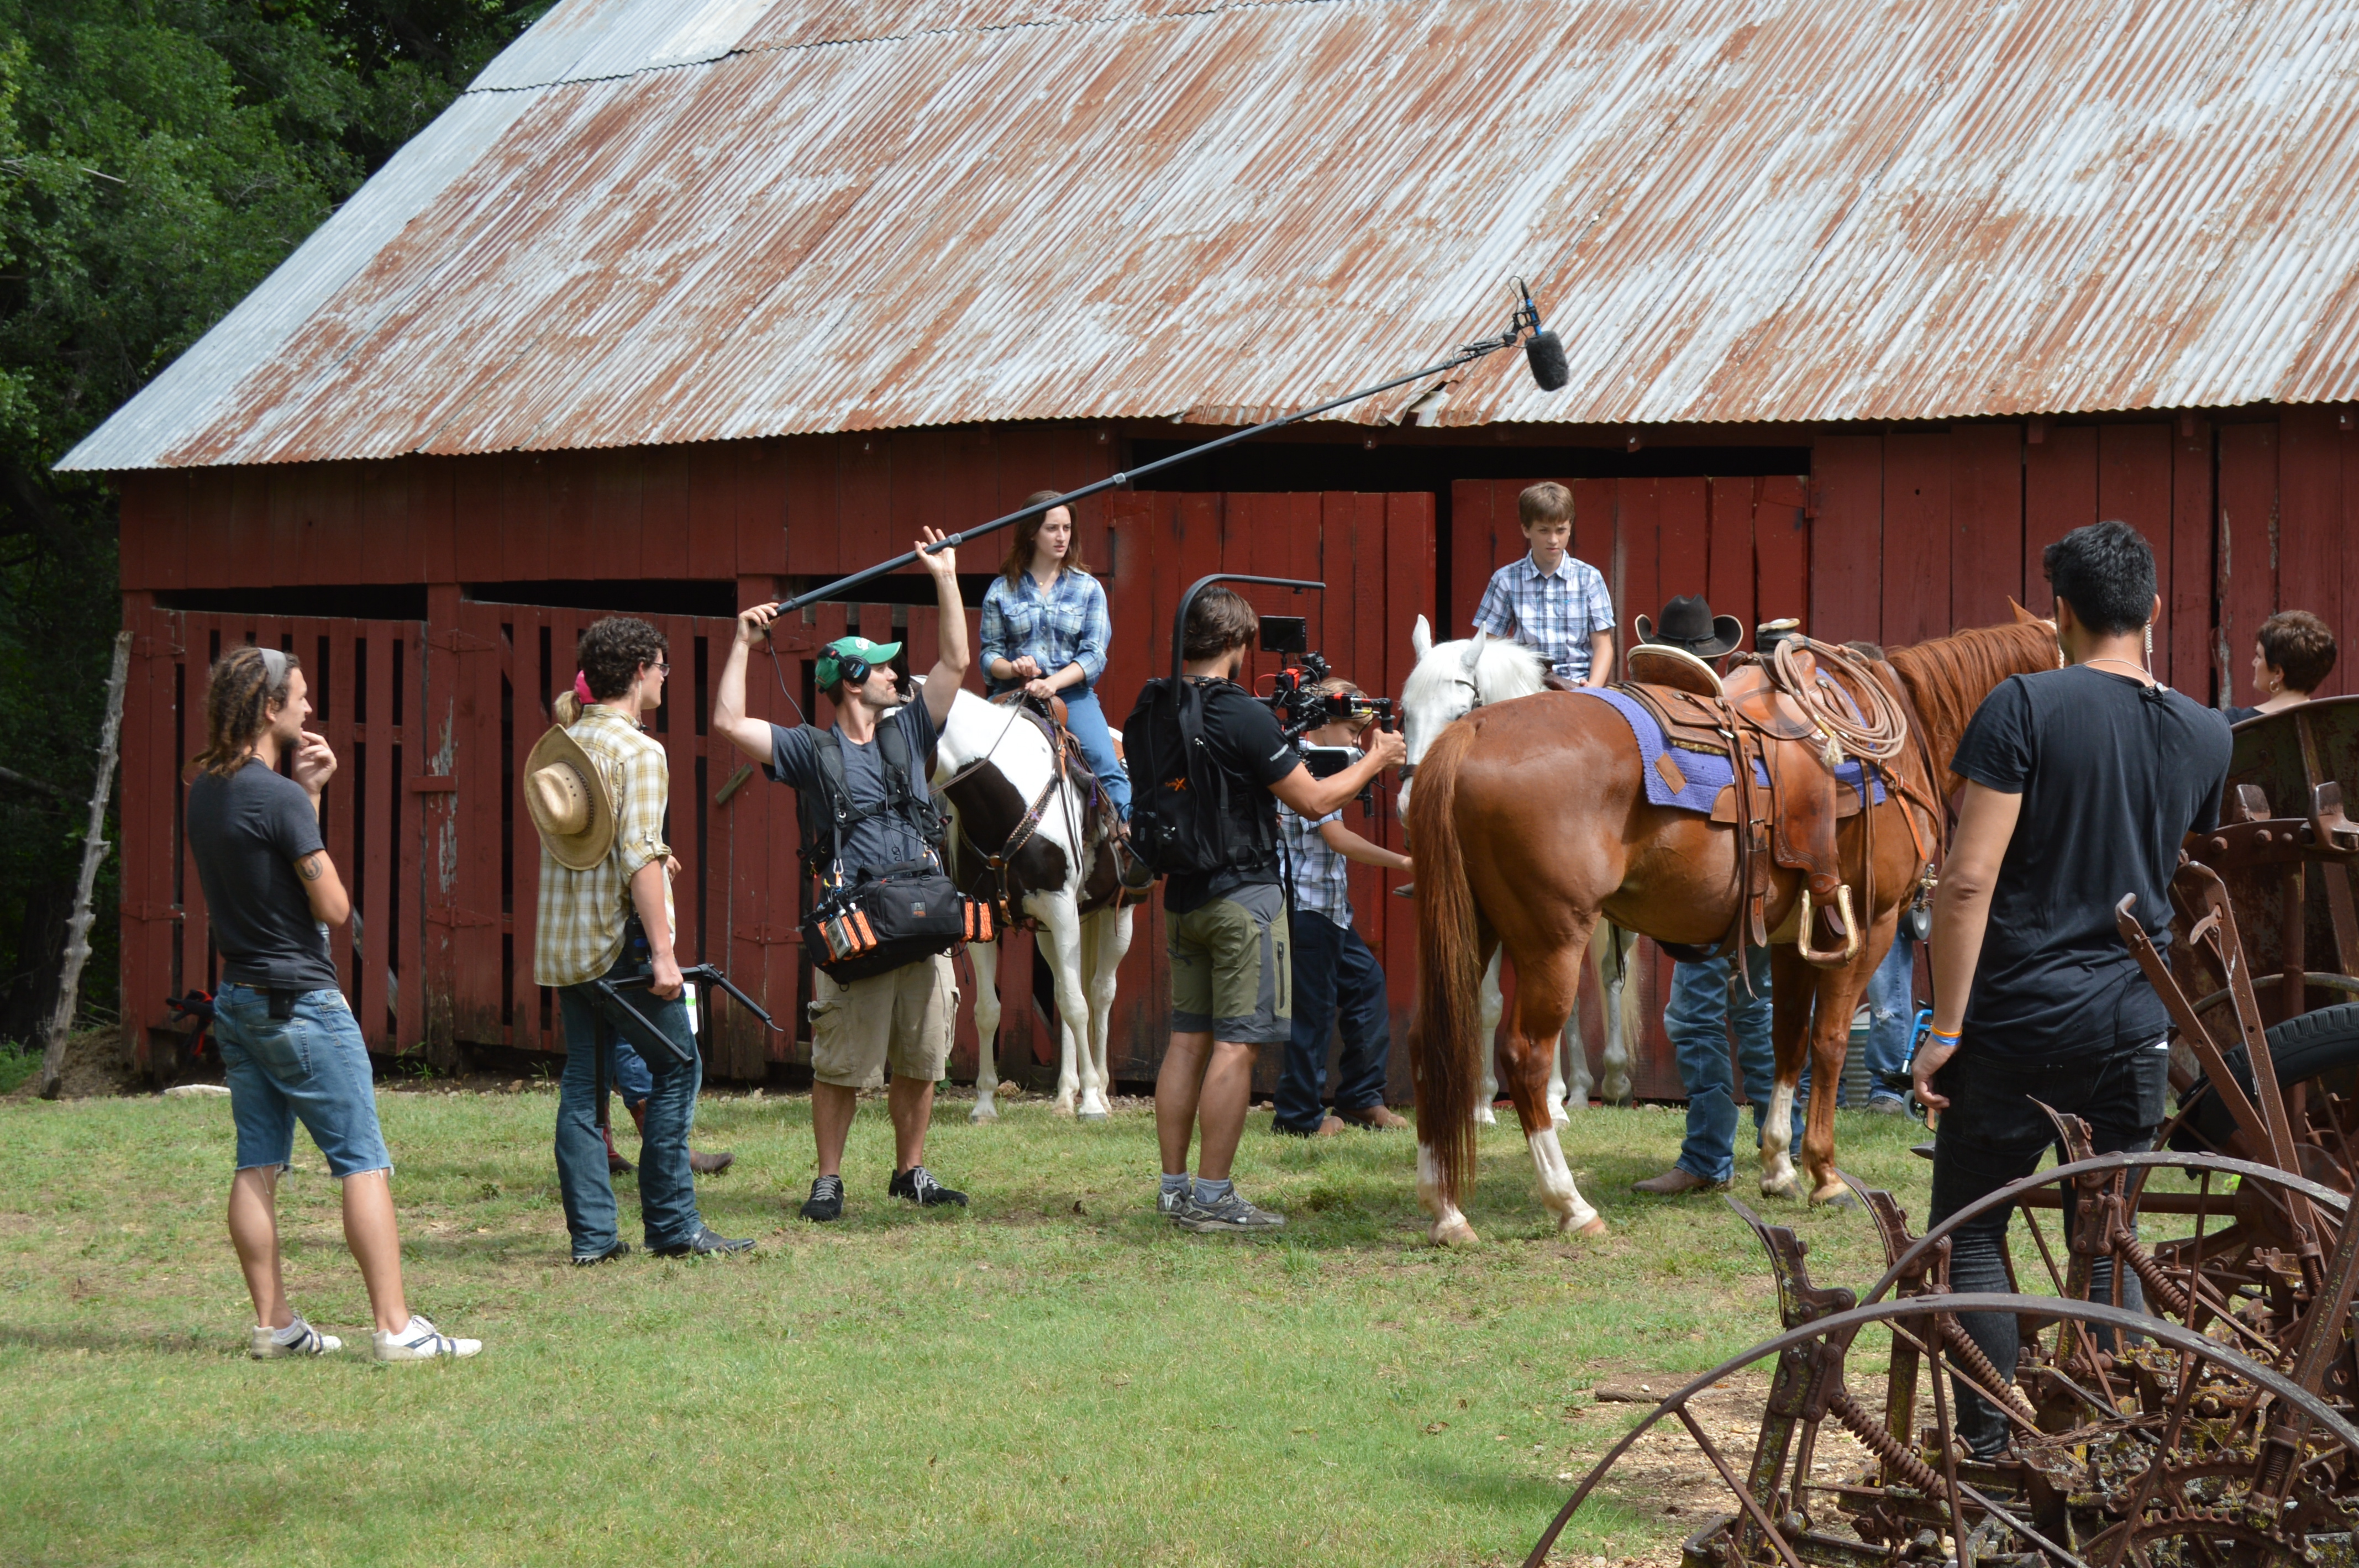 Preparing to ride in Billy and the Bandit